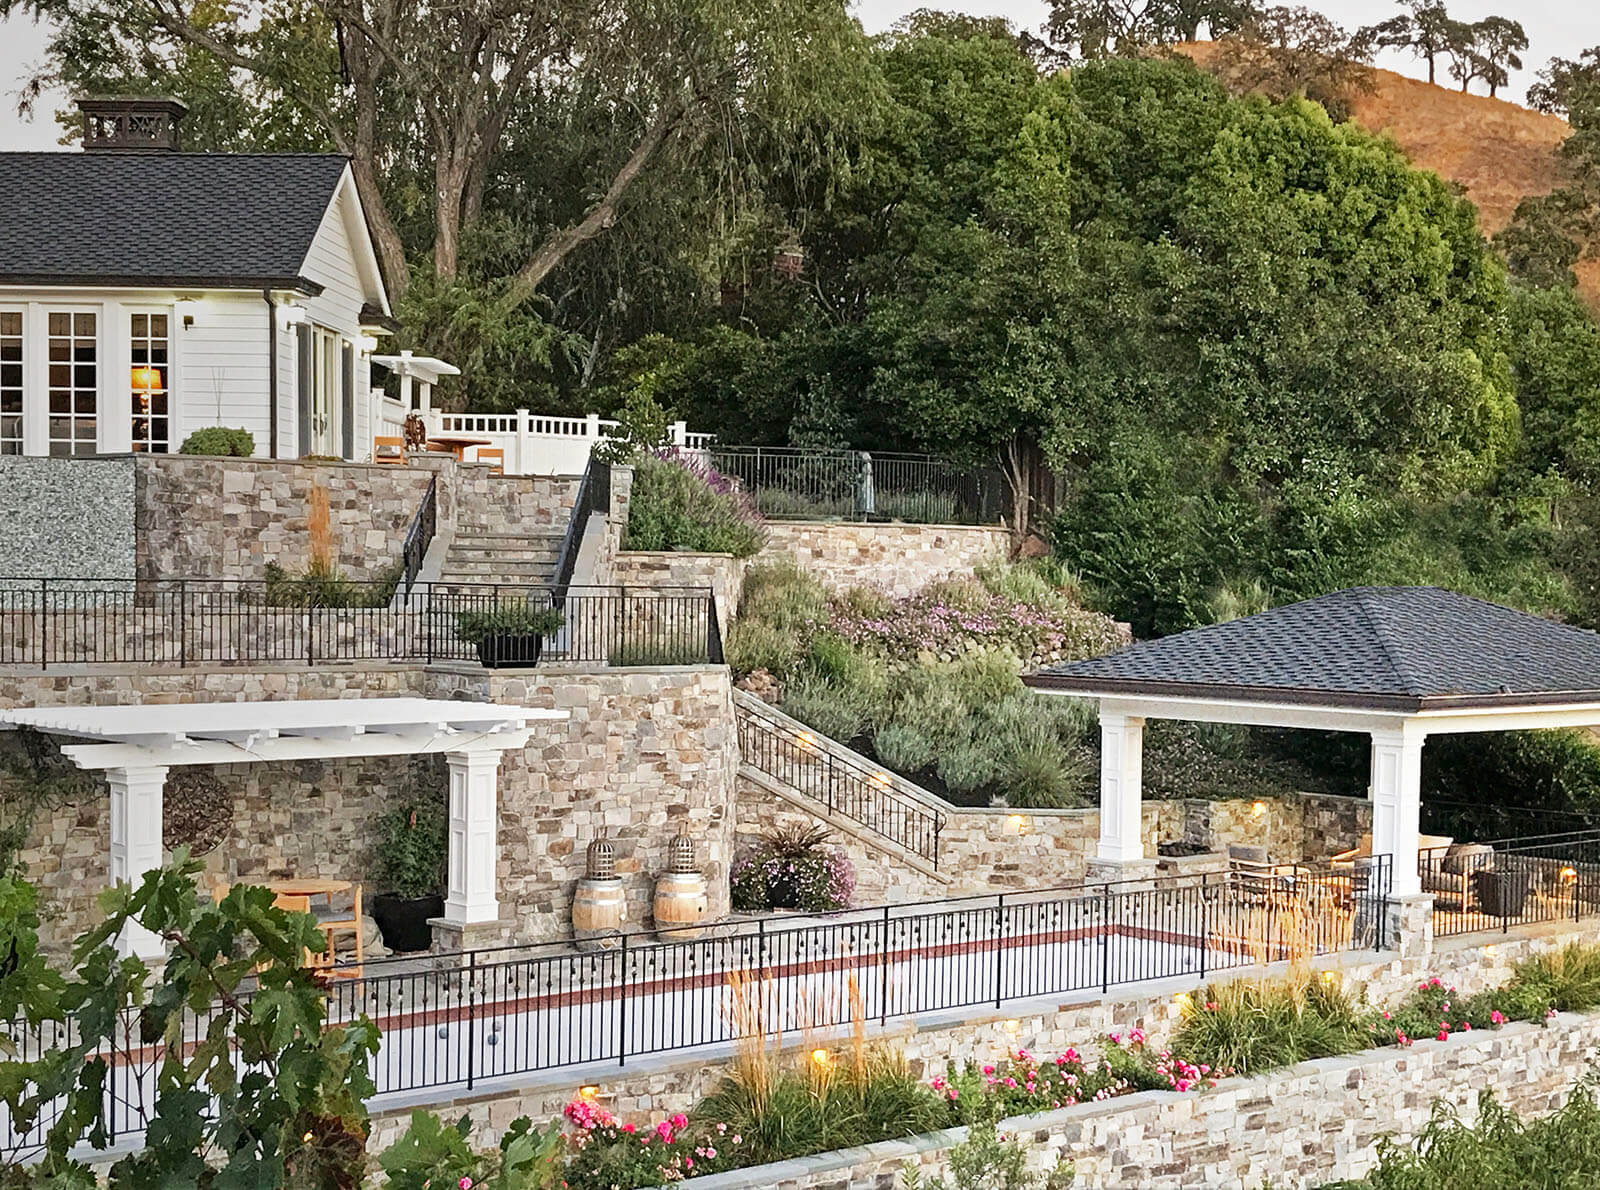 Mediterranean-style stone terrace with bocce ball court, pergola and pagoda seating